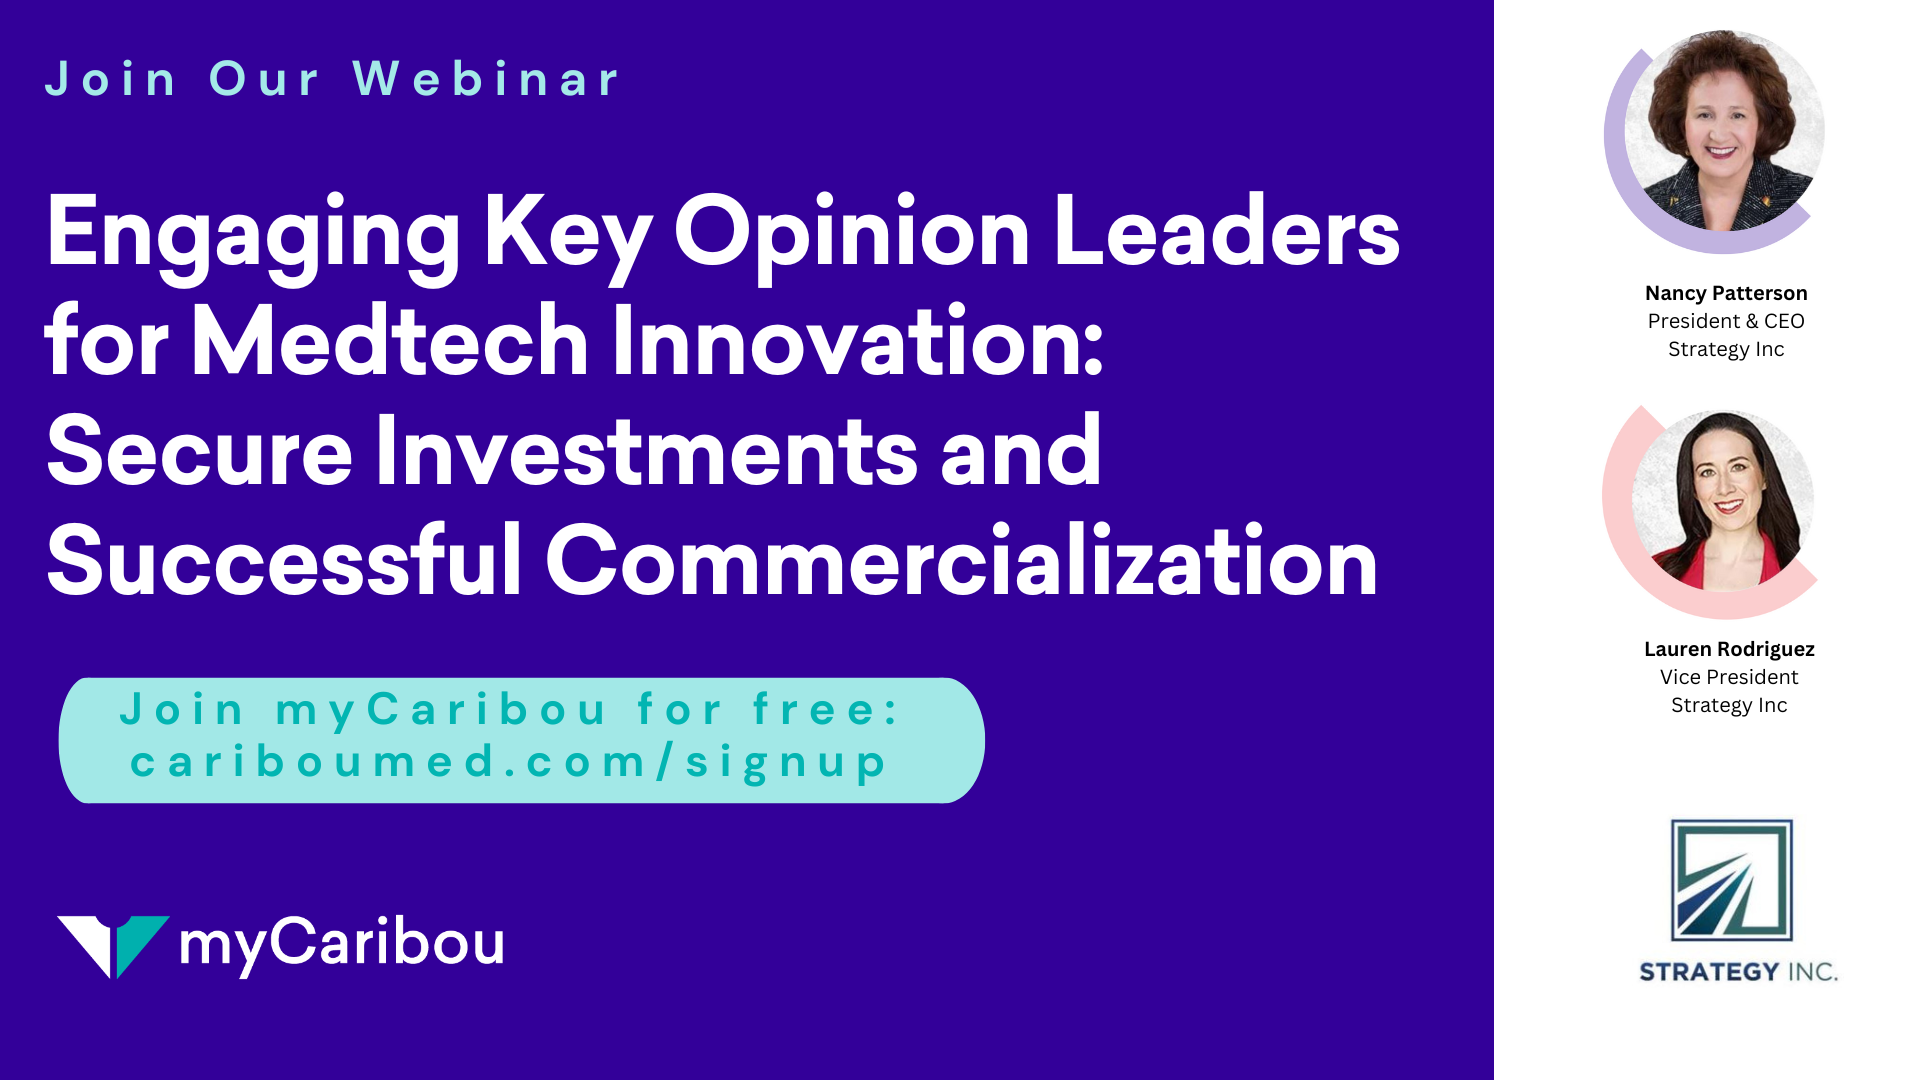 Watch our webinar Engaging Key Opinion Leaders for Medtech Innovation to Secure Investments and Successful Commercialization